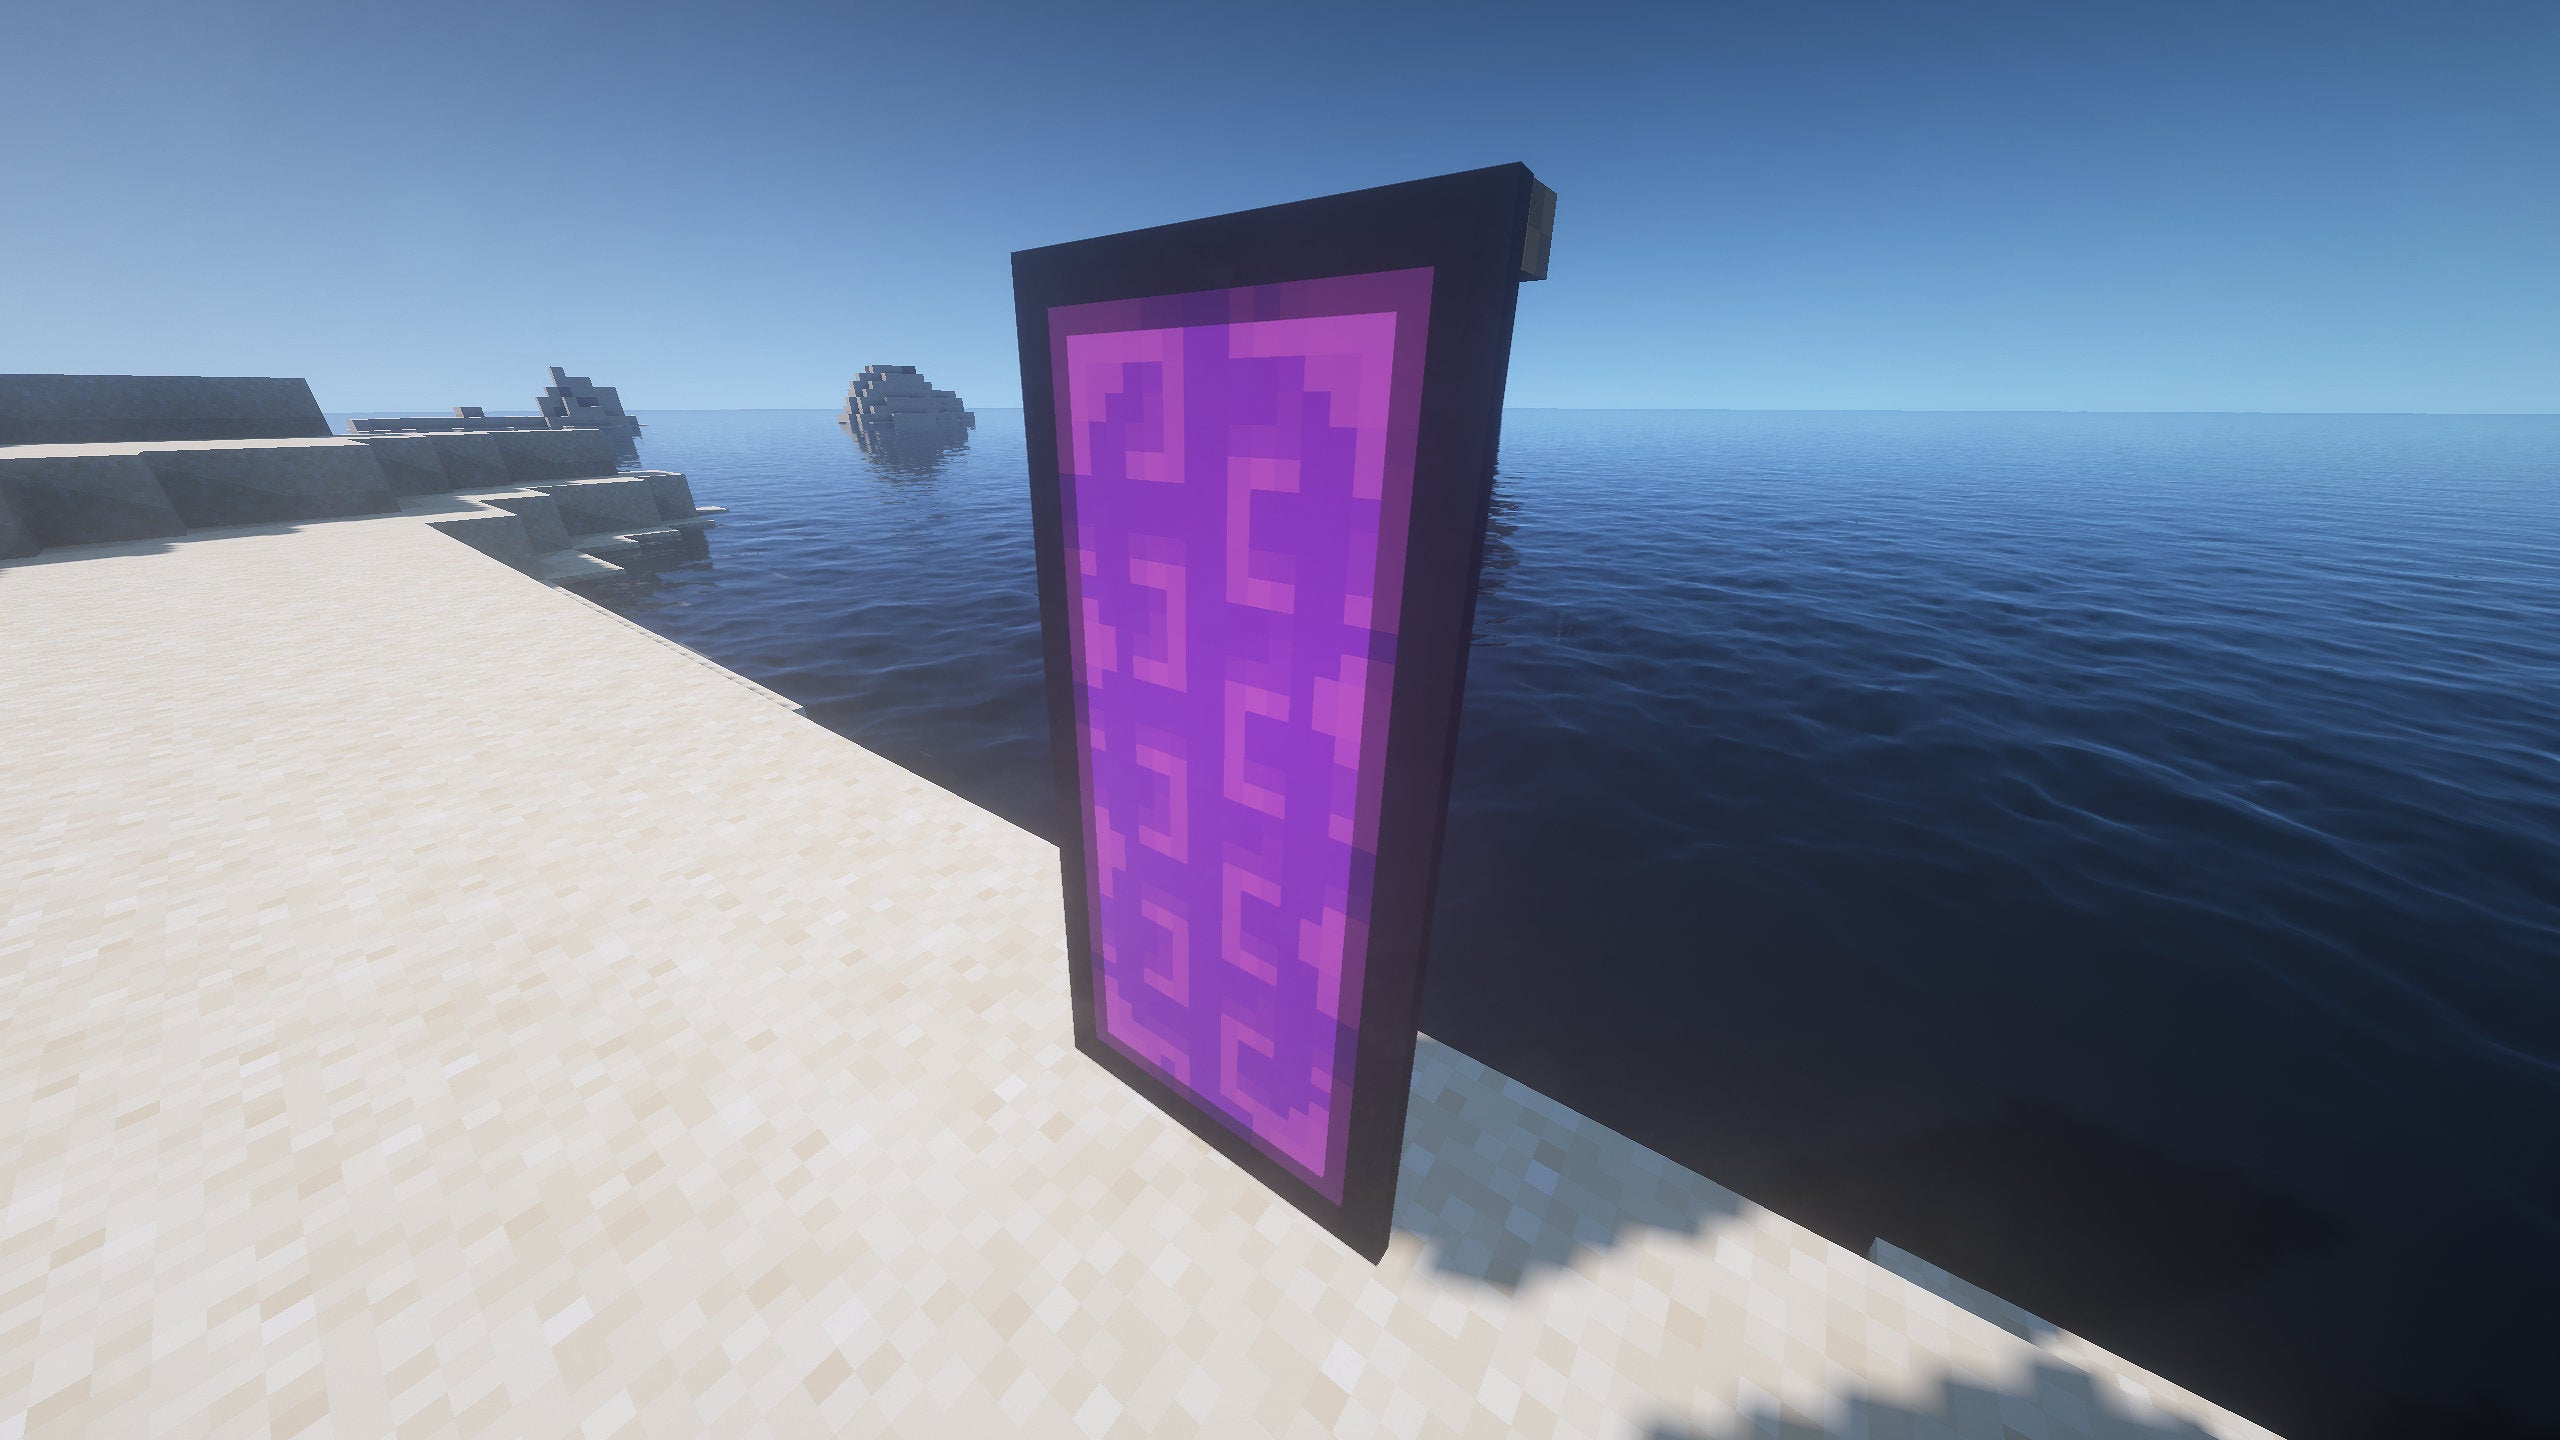 A Nether portal Banner in Minecraft, placed in the ground by the coast.